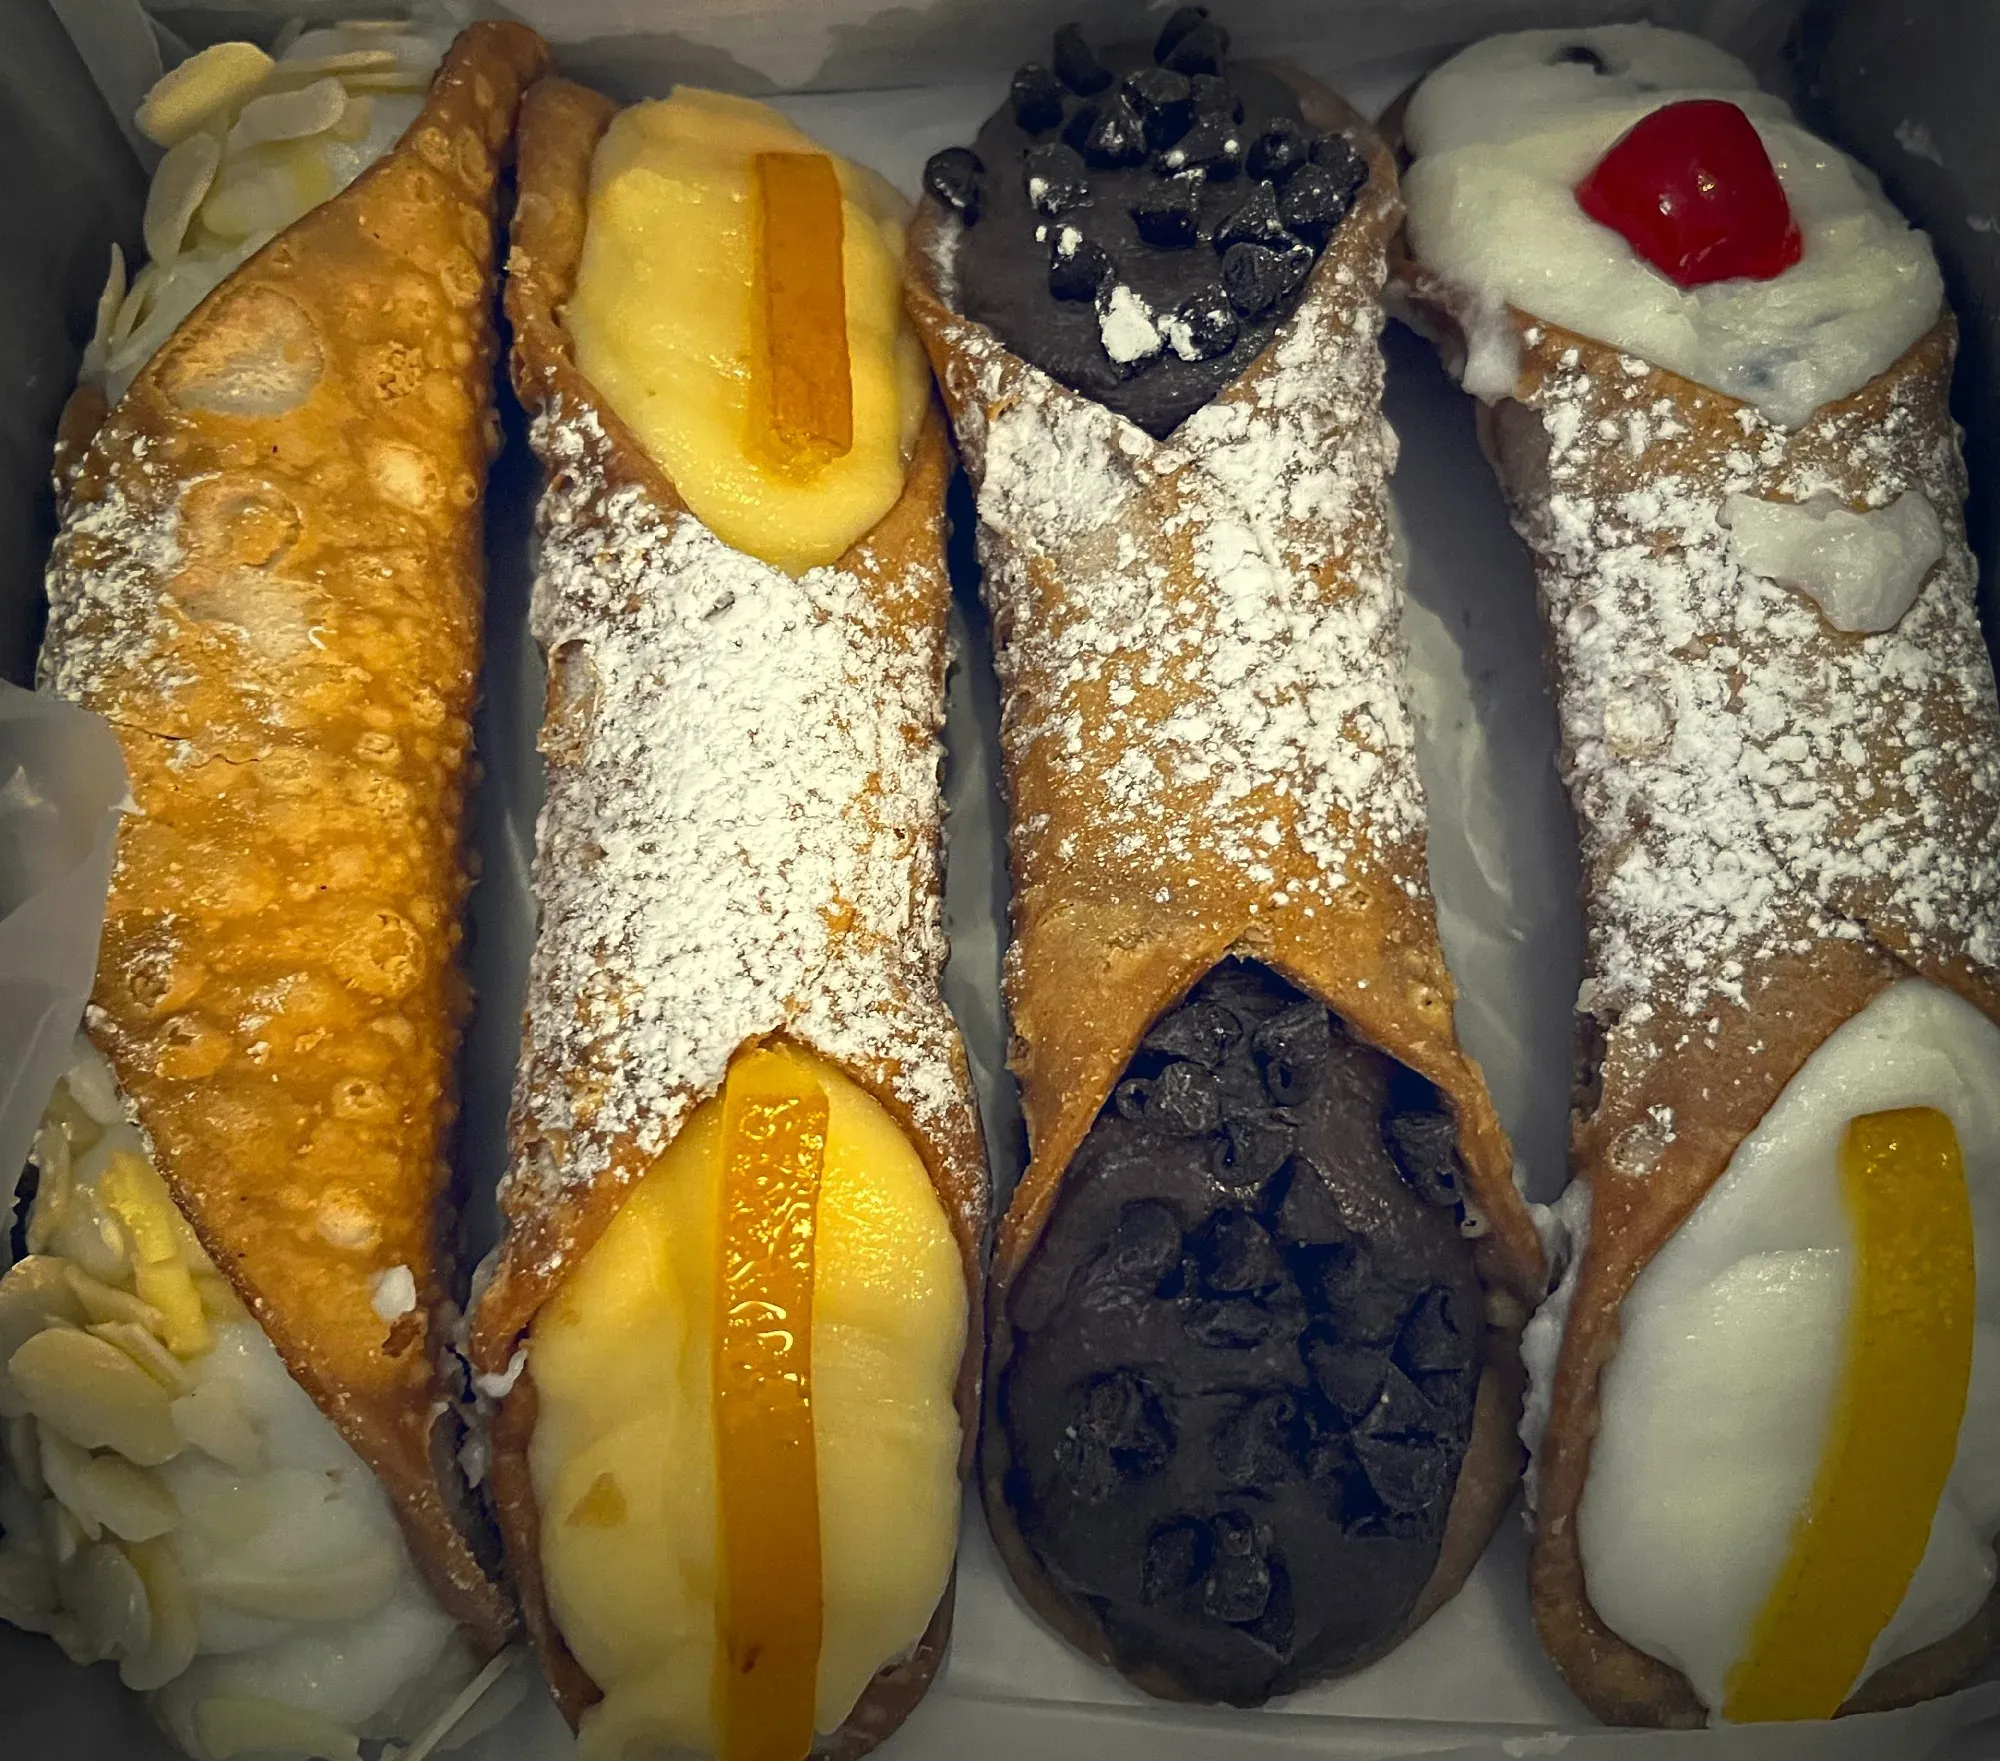 Canolli. Four canolli in a pastry box. Almond, orange, chocolate, and classic flavors.